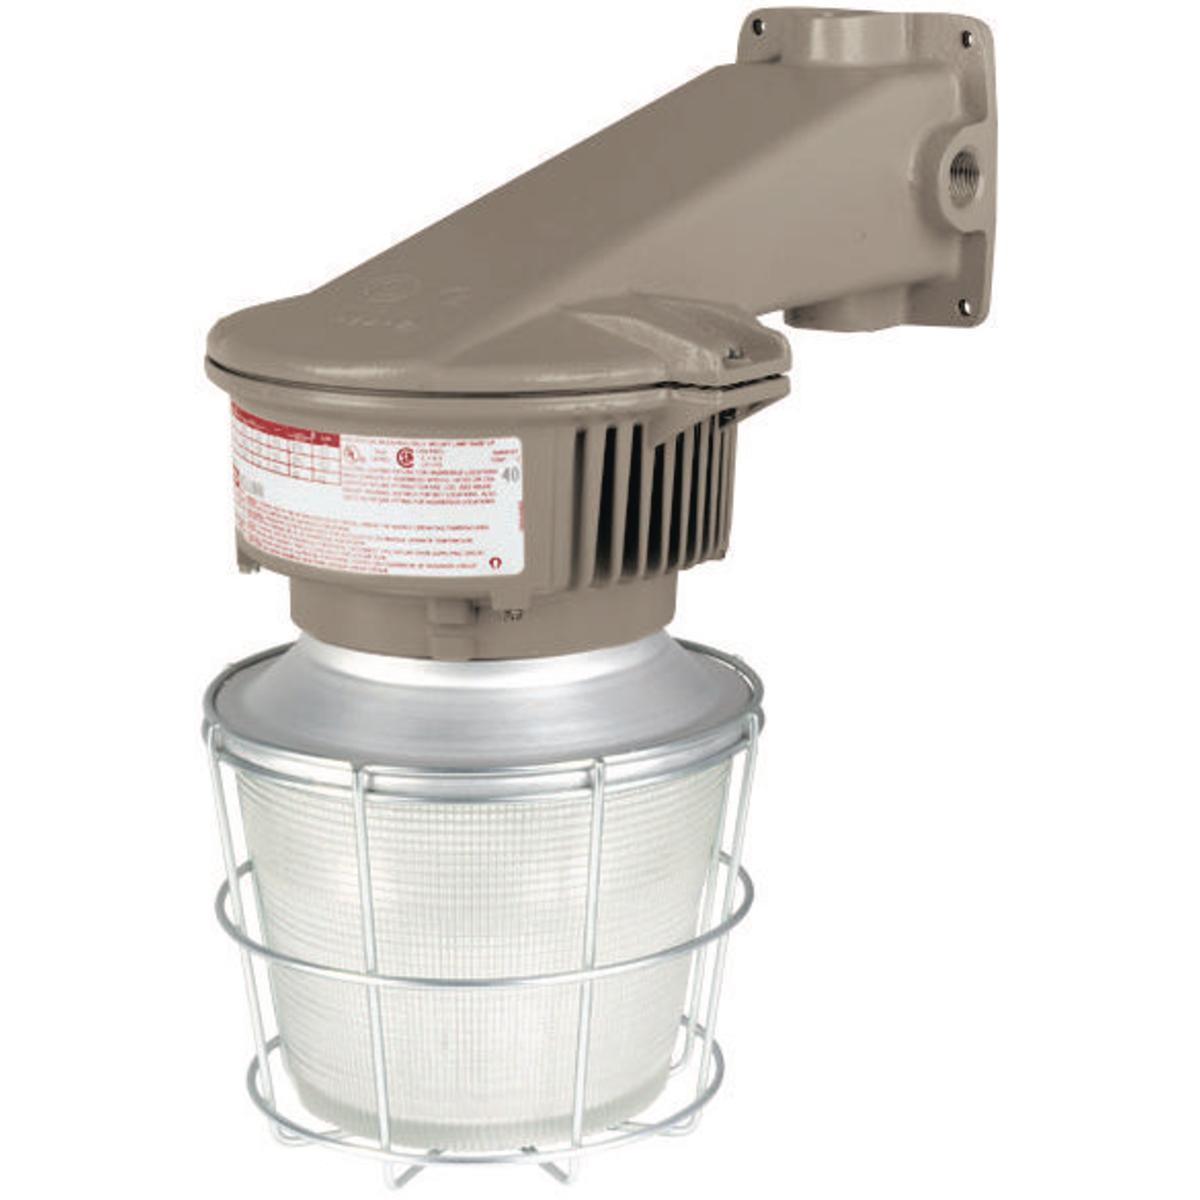 Hubbell MBL4530B2S8G The MBL Series is a compact low bay energy efficient LED. The design of the MBL makes it suitable for harsh and hazardous environments using a cast copper-free aluminum. Its low profile and compact design allow the MBL to fit in areas where larger fixture